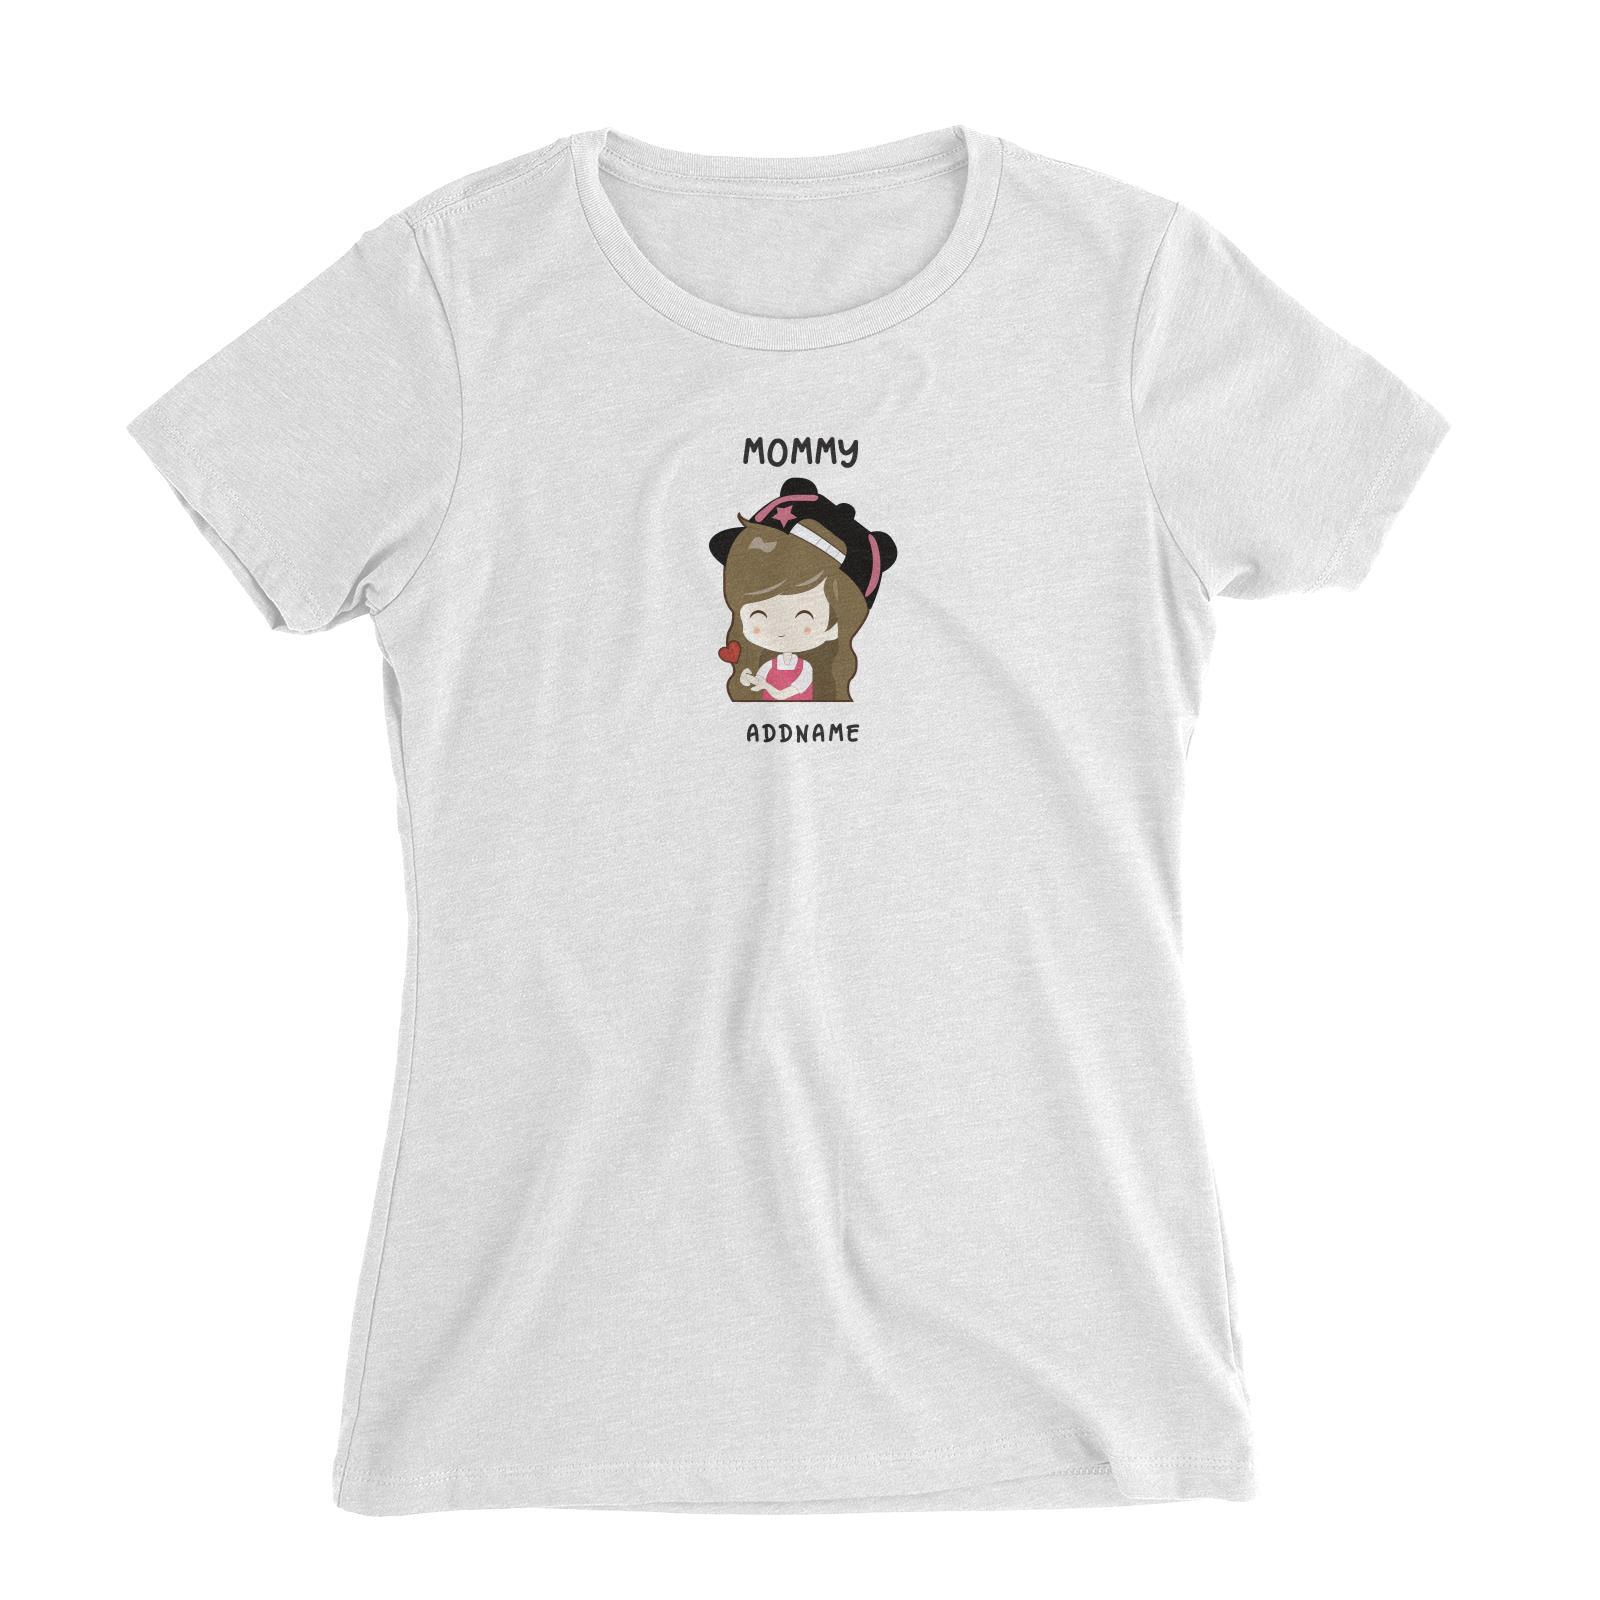 My Lovely Family Series Mommy Addname Women Slim Fit T-Shirt